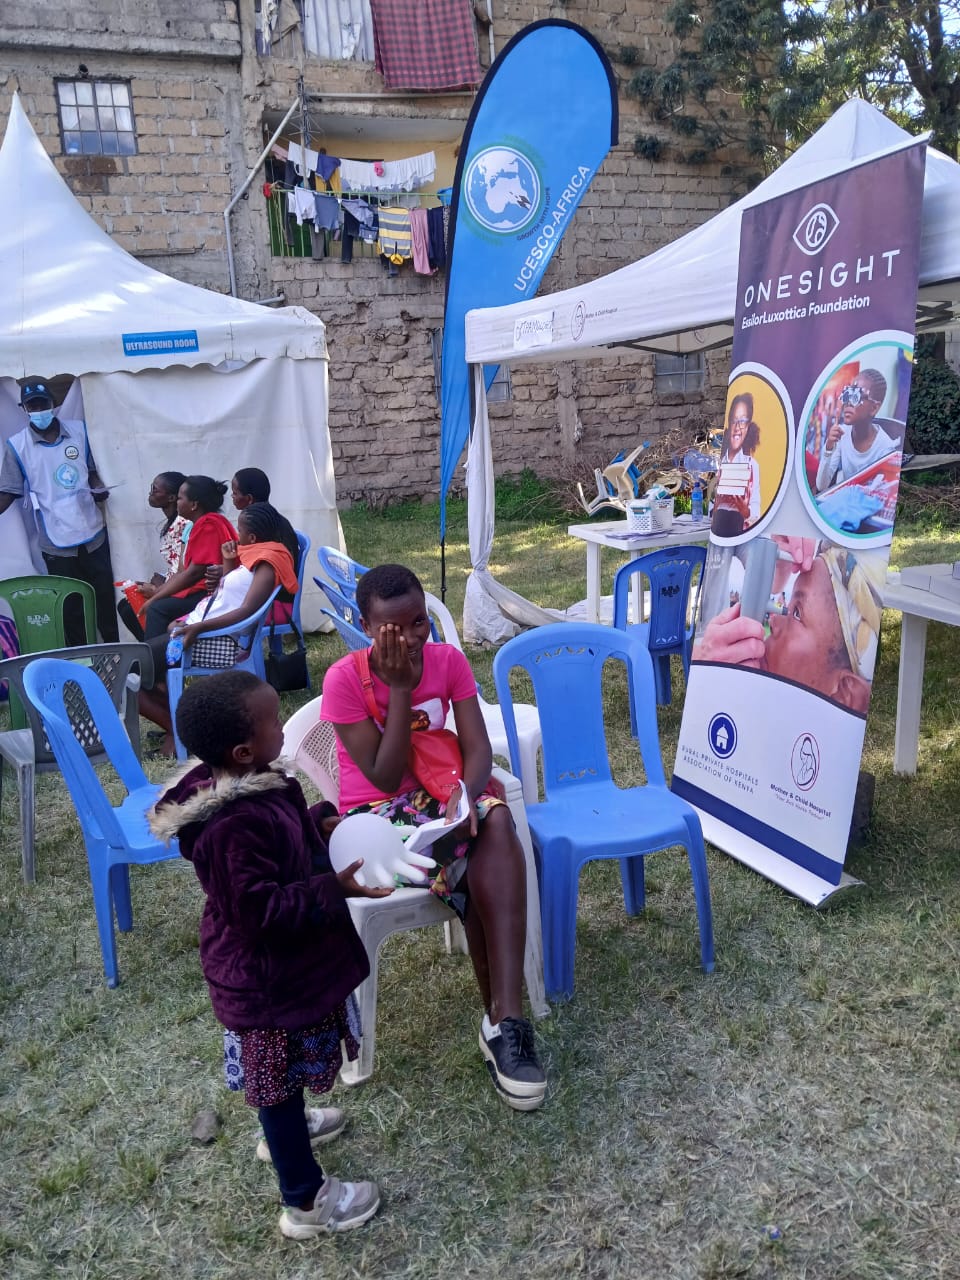 A Vision screening event where a RUPHA facility donated over 300 readers, sunglass and R2C eyewear